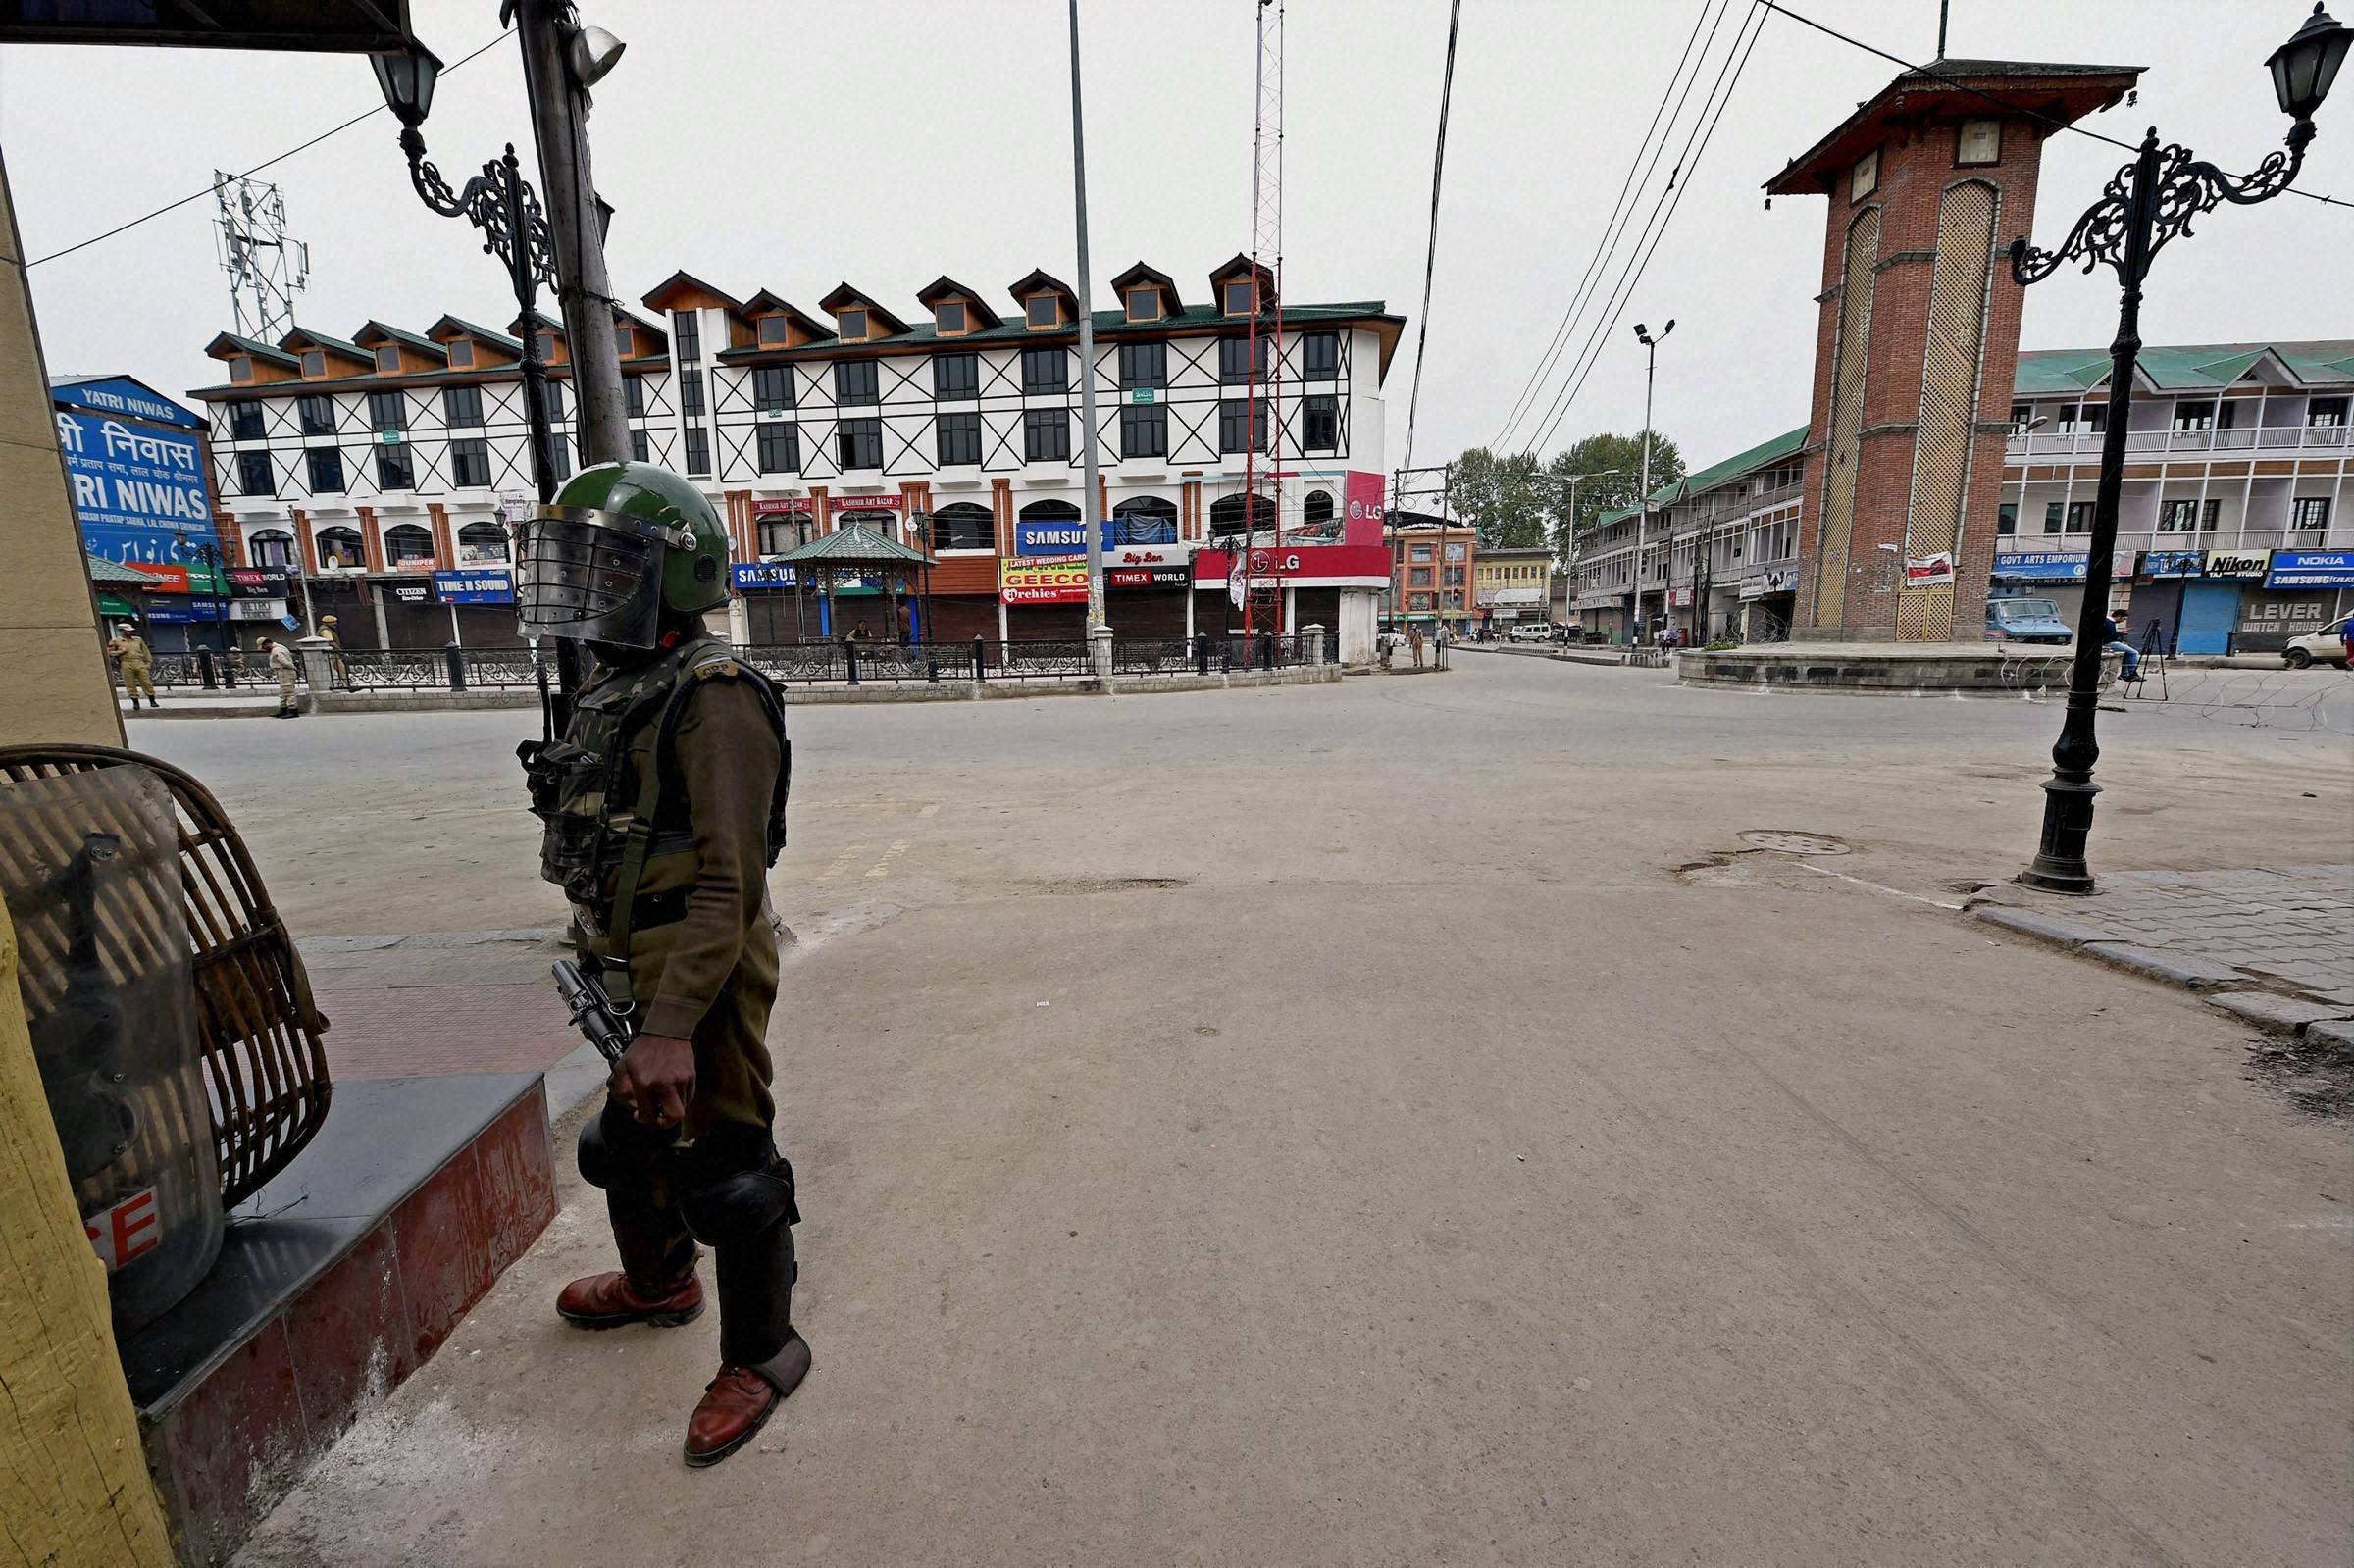 The Handwara Situation Is Going From Bad To Worse. Now An 18-Year-Old Dies Due To Army Firing